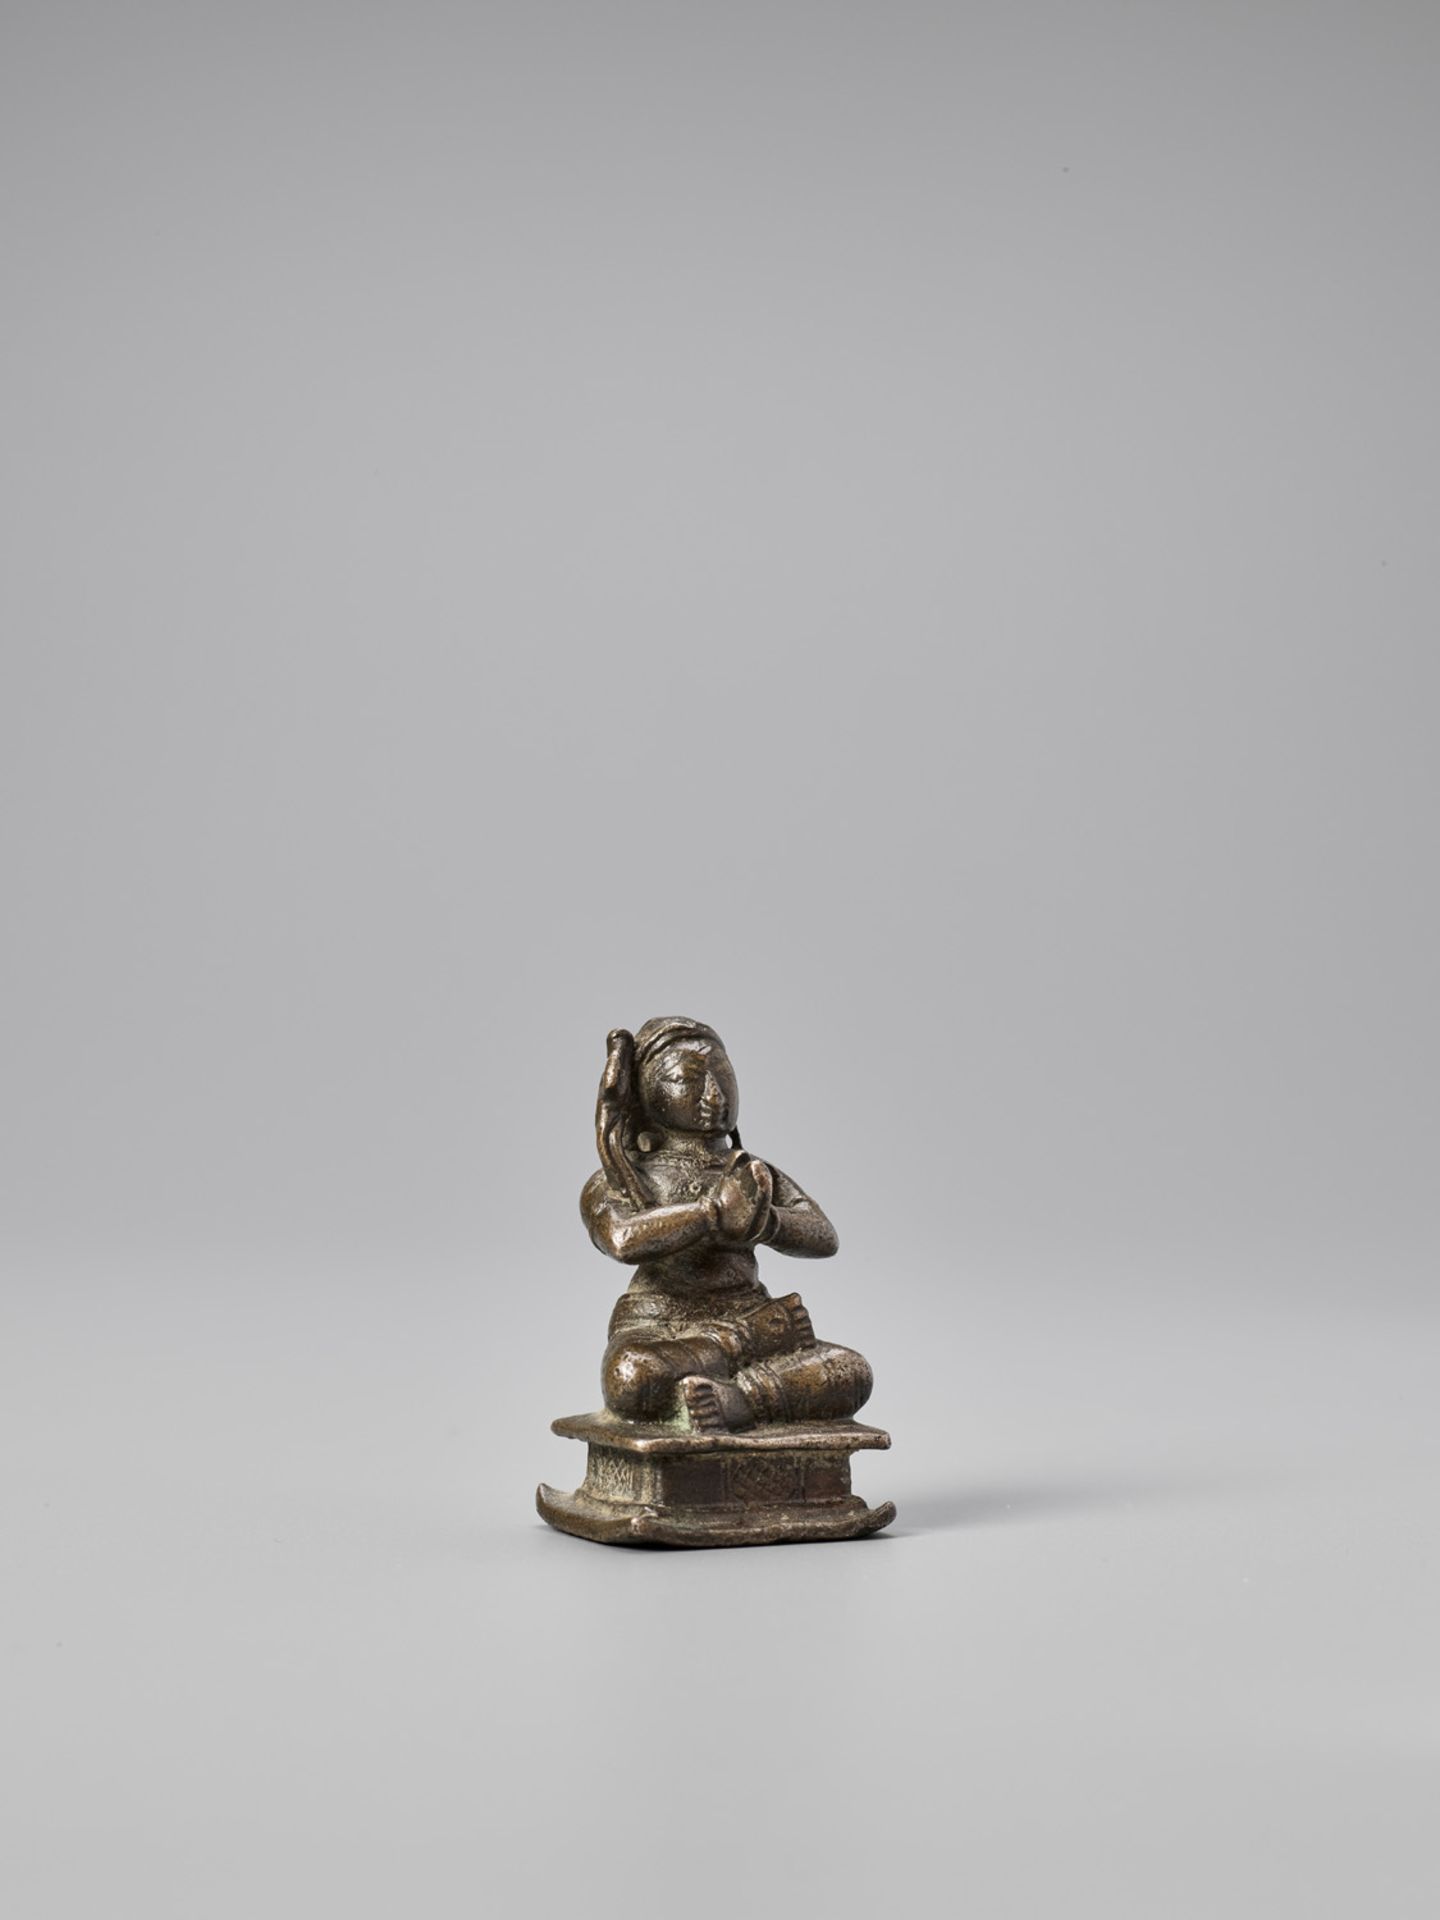 TWO SMALL INDIAN BRONZE FIGURES, 19TH CENTURY - Image 8 of 10